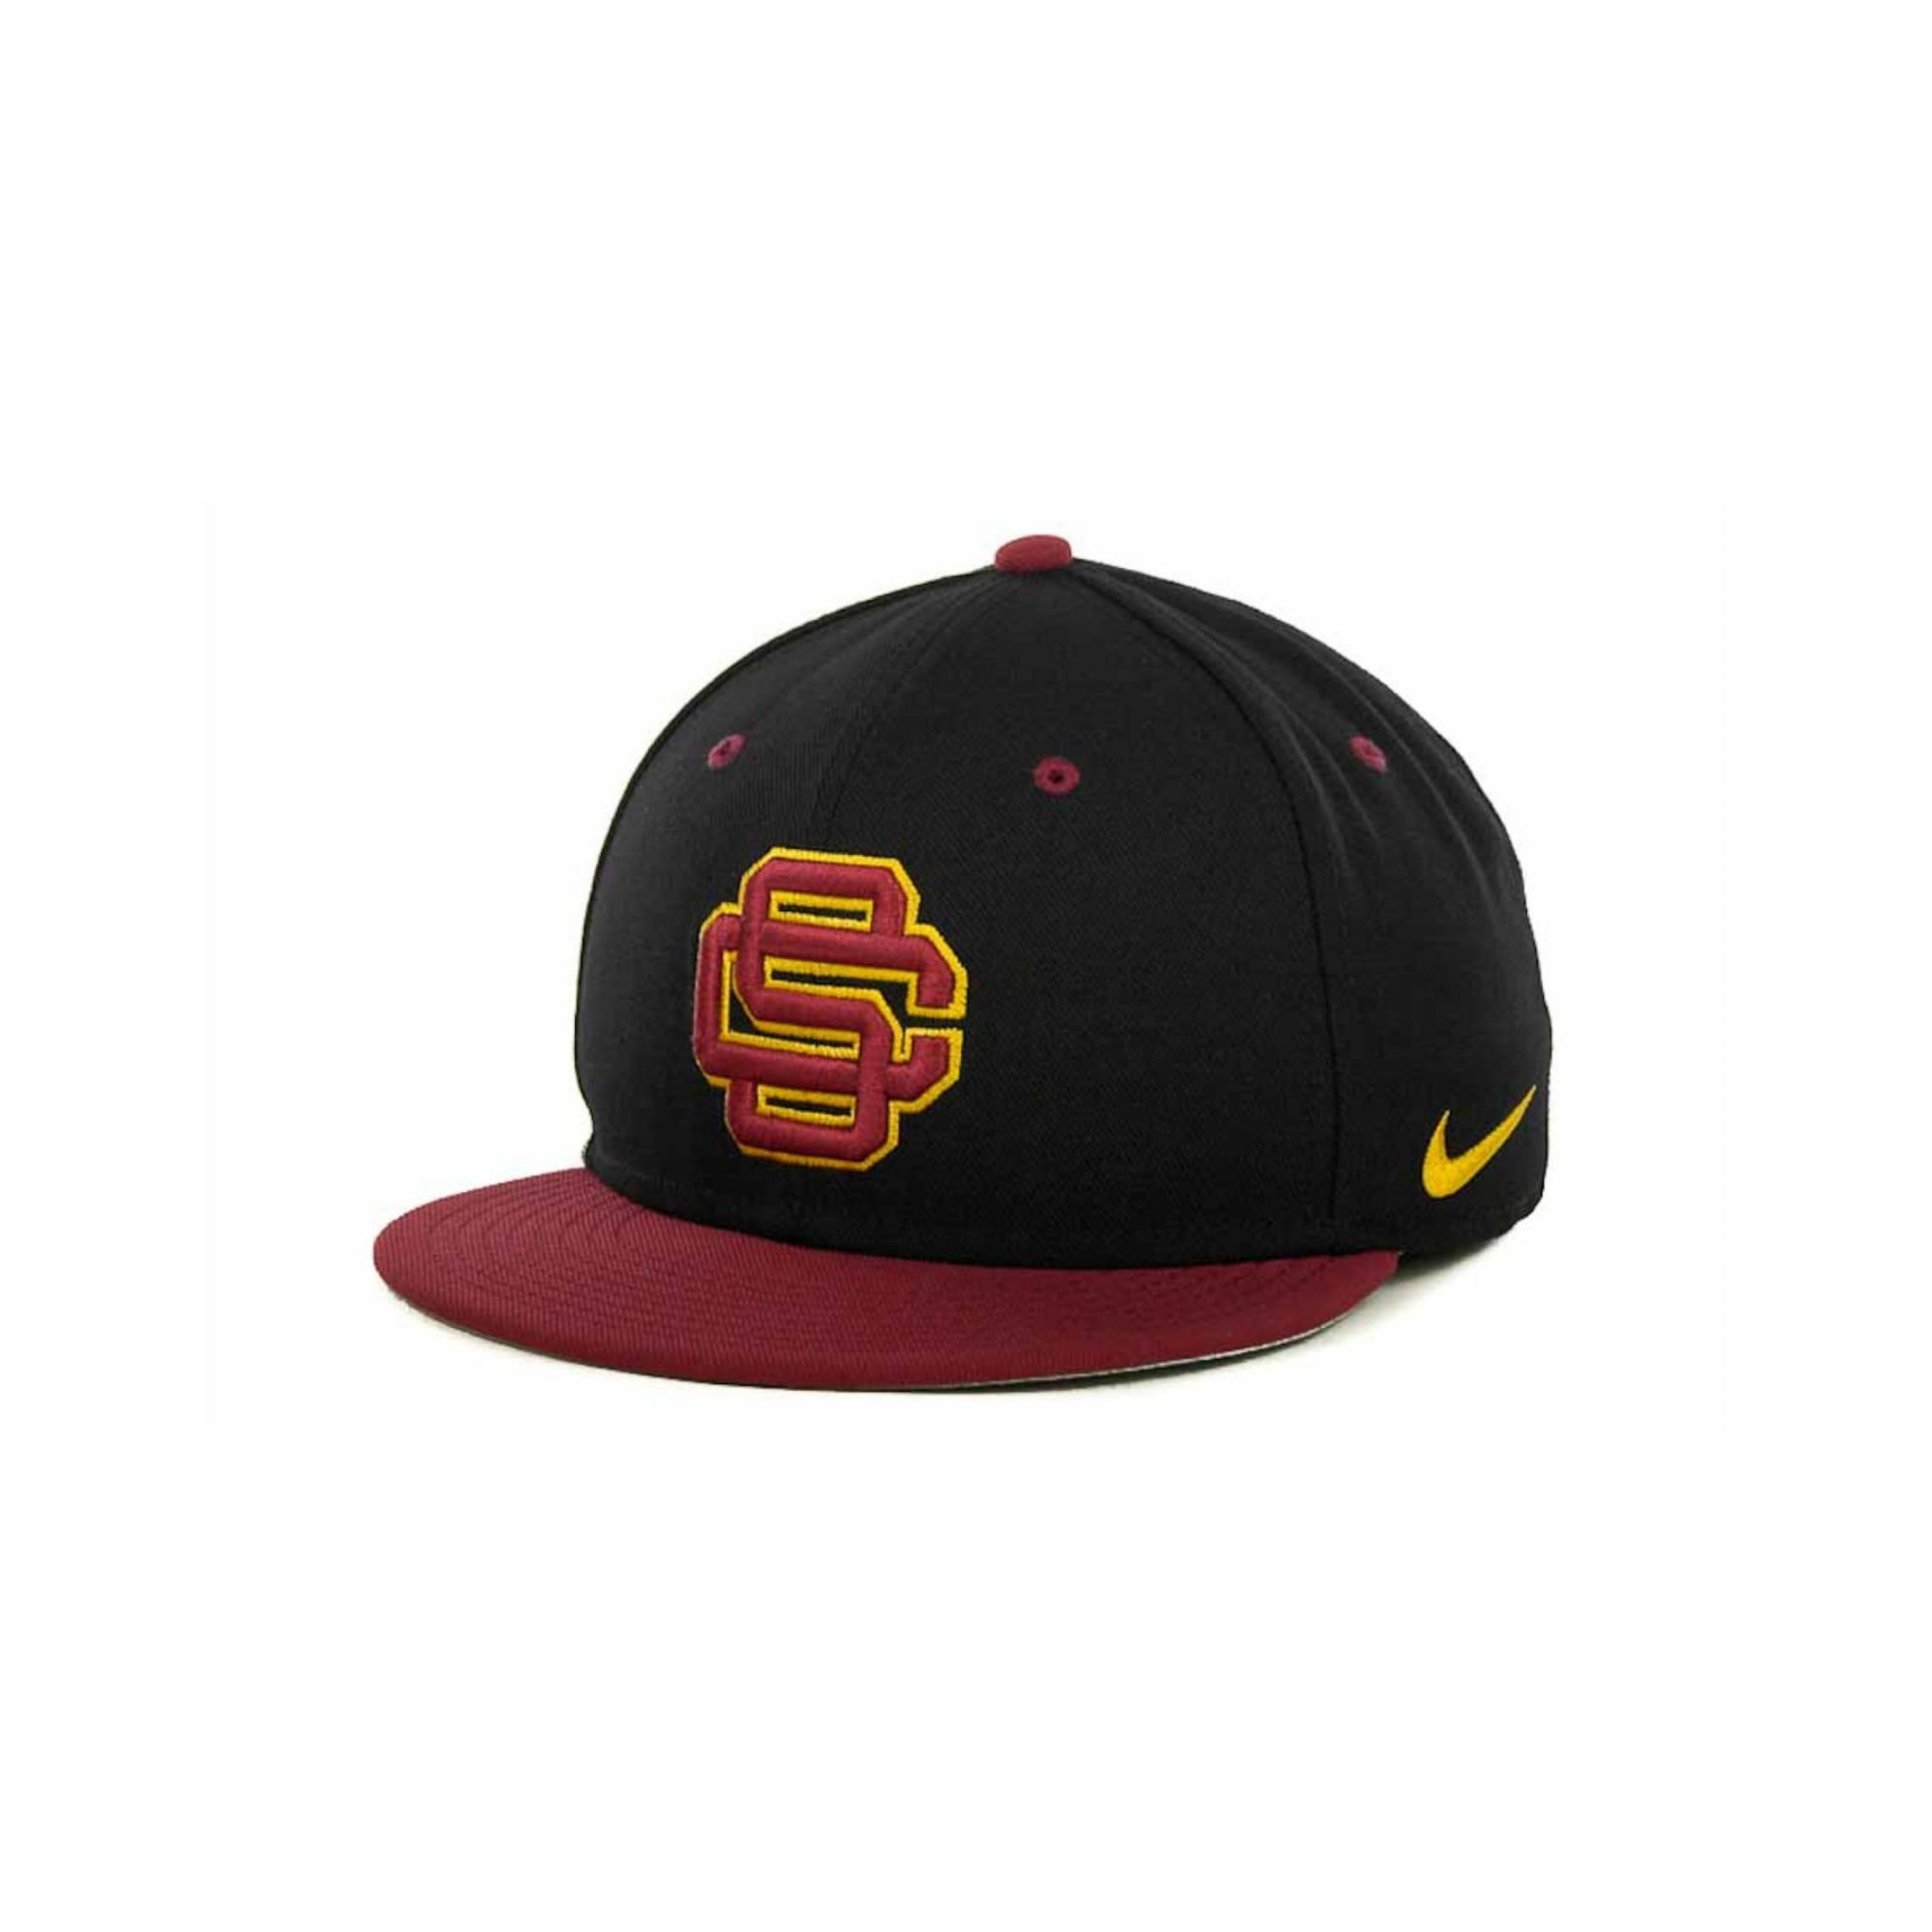 Nike Usc Trojans Ncaa Team Sports Authentic Fitted Cap in Black/Crimson ...